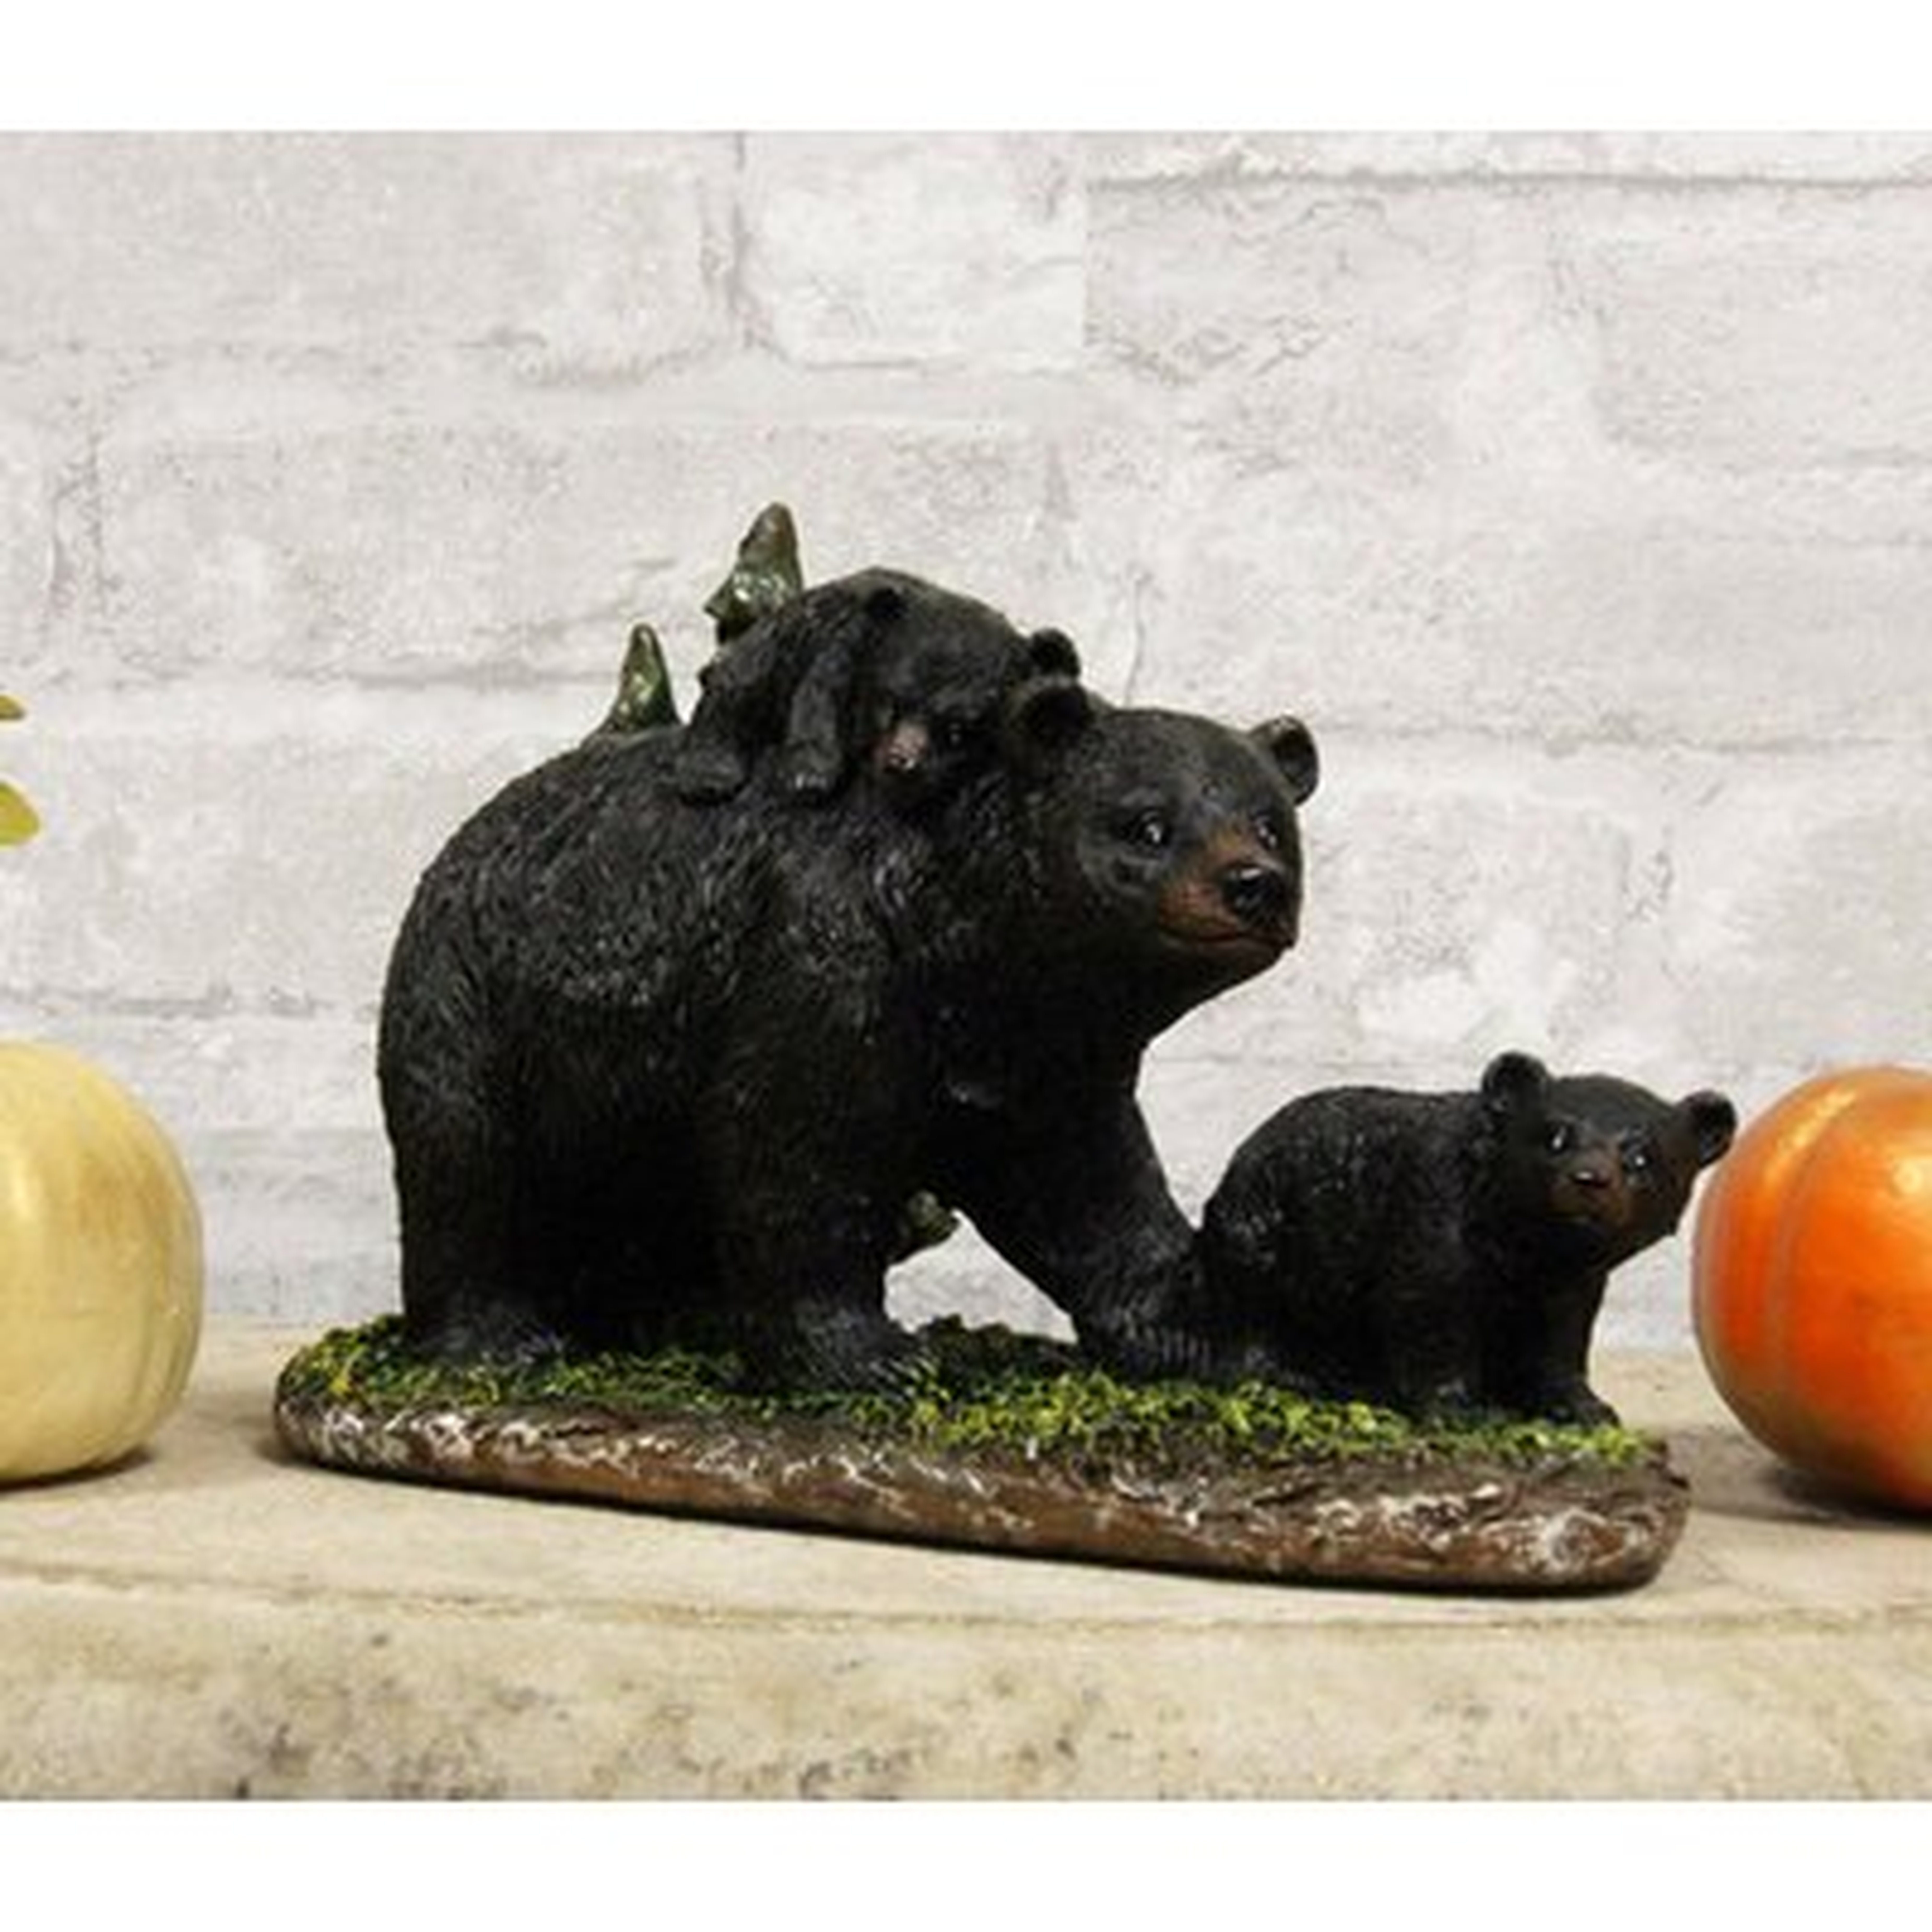 Ebros 7.75" Long Realistic Black Momma Bear Piggybacking Her Cub By A Pine Tree Statue Rustic Wildlife Forest Western Cabin Decor Bears Family Figurine - Wayfair